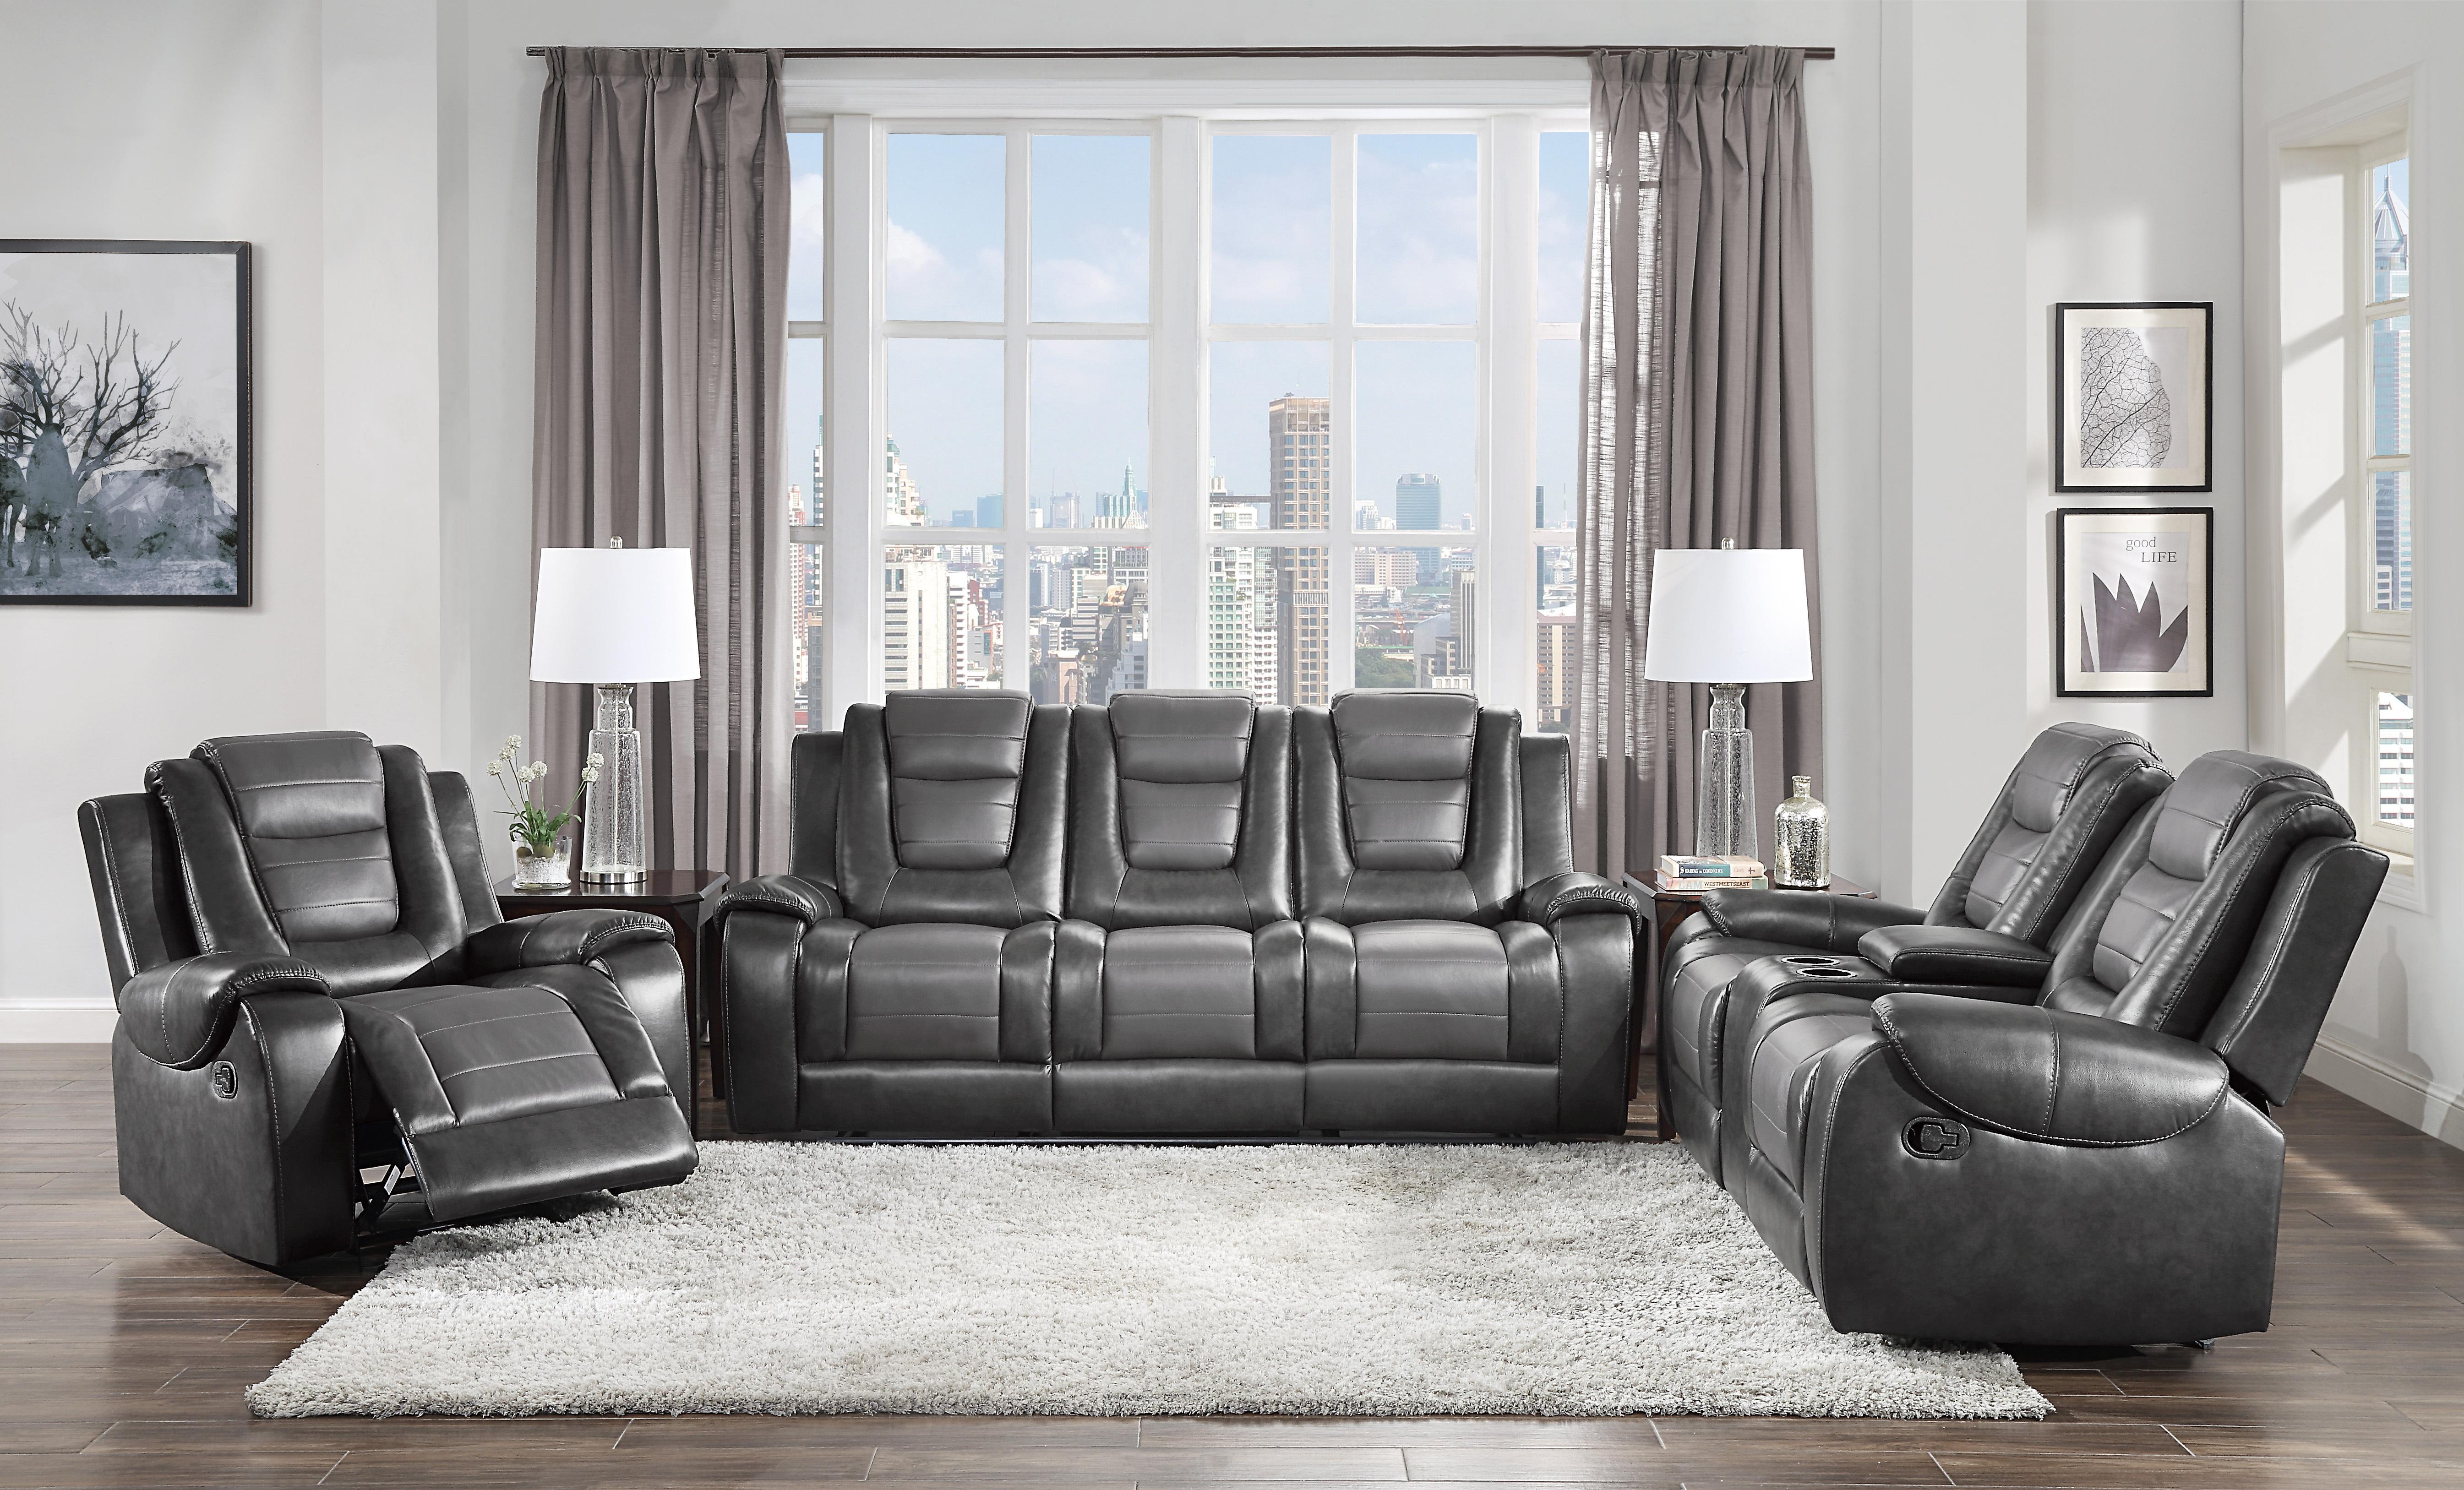 

    
Transitional Dark Gray & Light Gray Faux Leather Reclining Set 3pcs Homelegance 9470GY Briscoe
